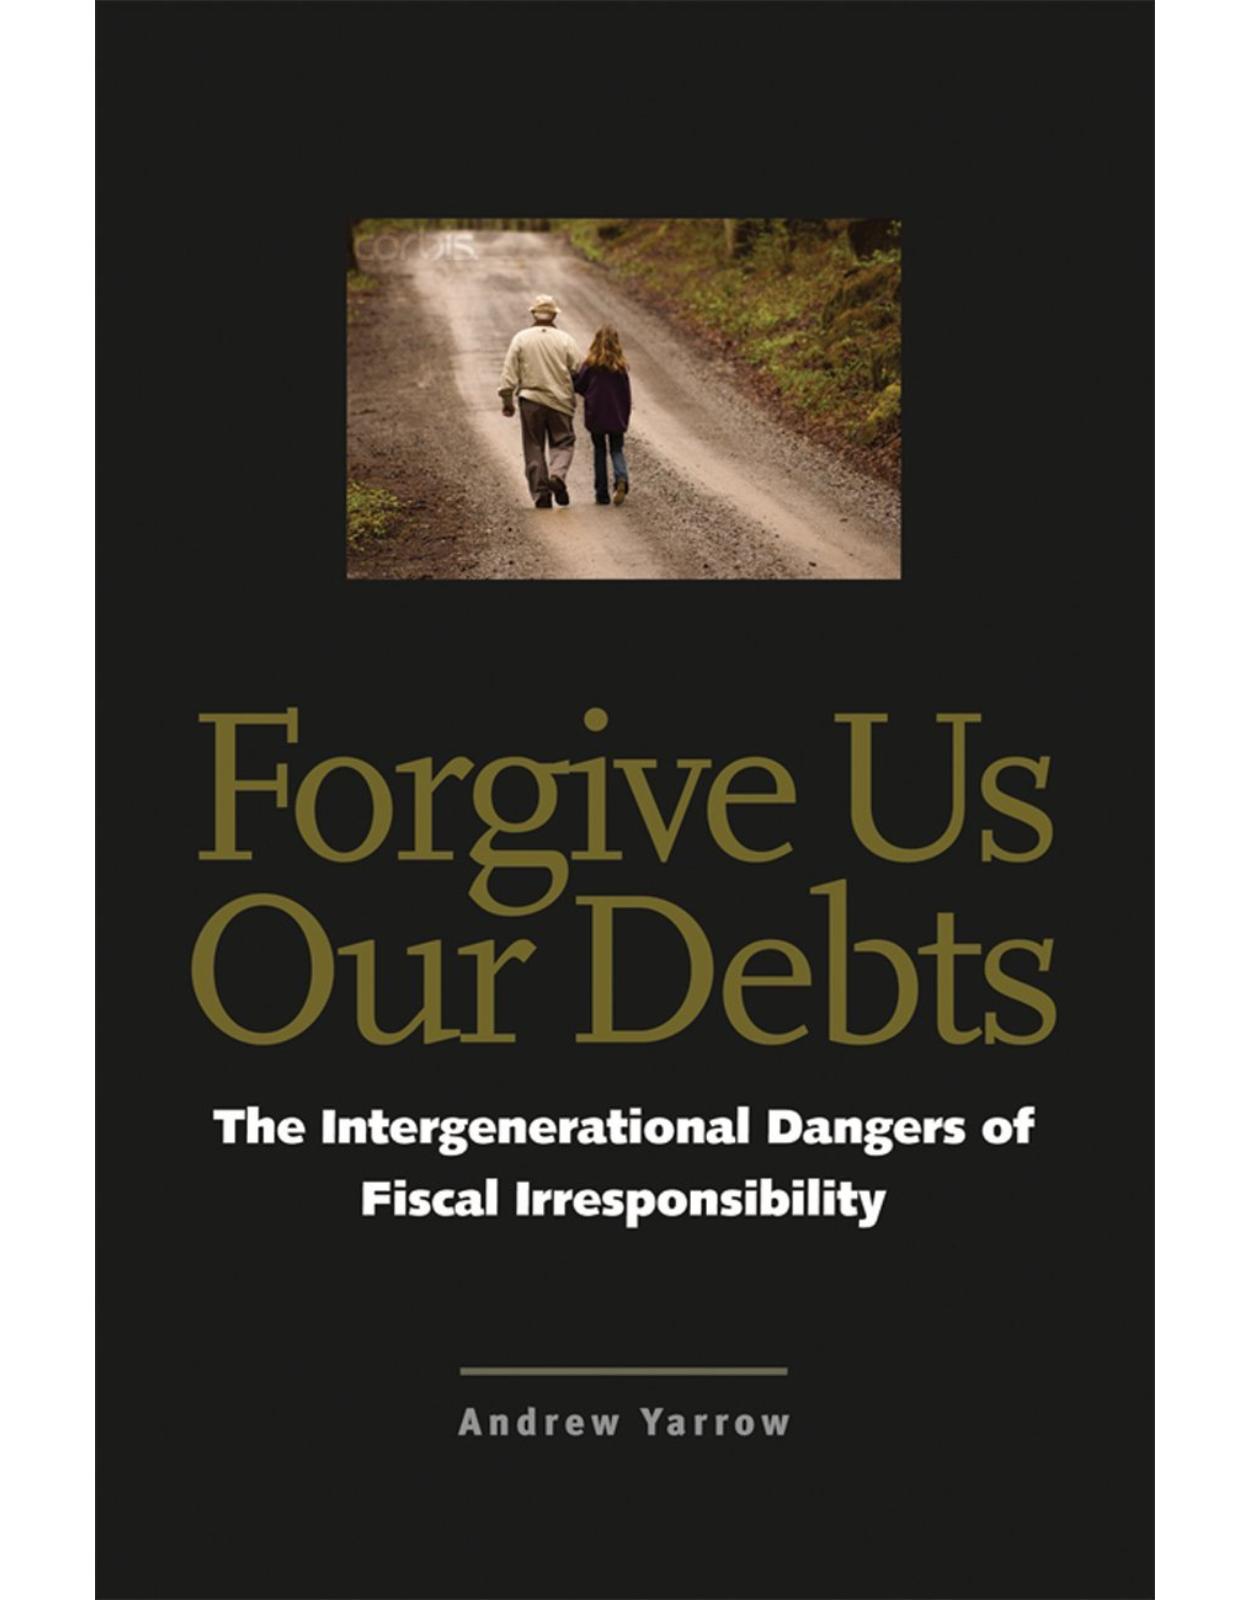 Forgive Us Our Debts. The Intergenerational Dangers of Fiscal Irresponsibility